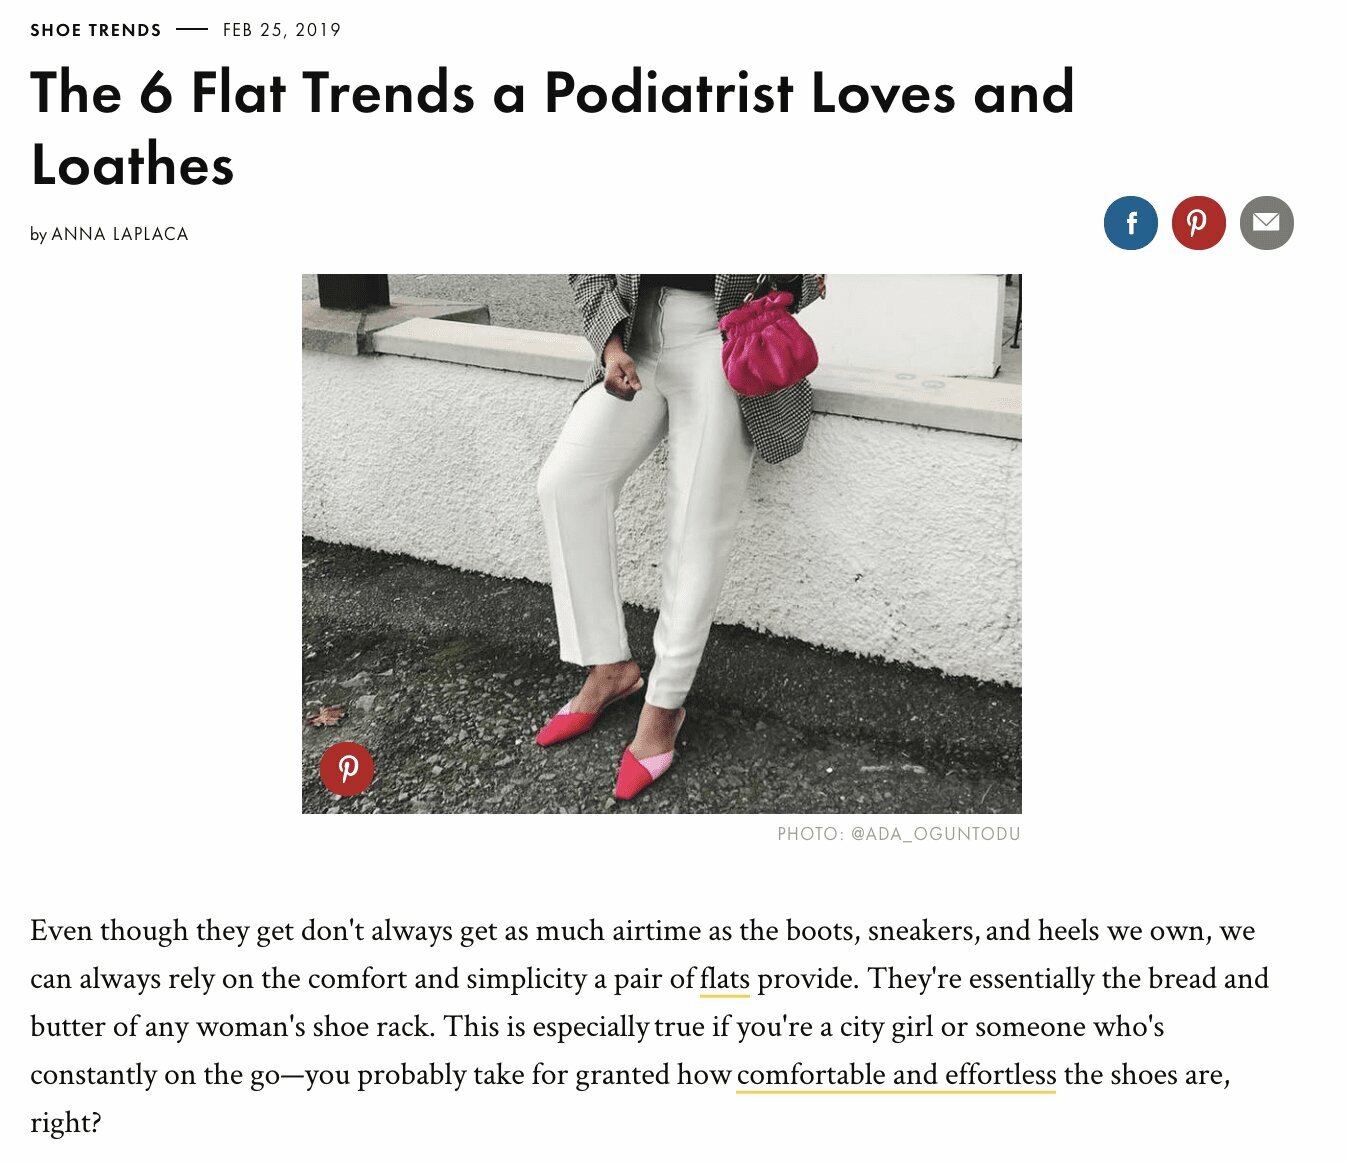 Fashion Site Interviews Dr. Cunha On Latest Flat Shoe Trends